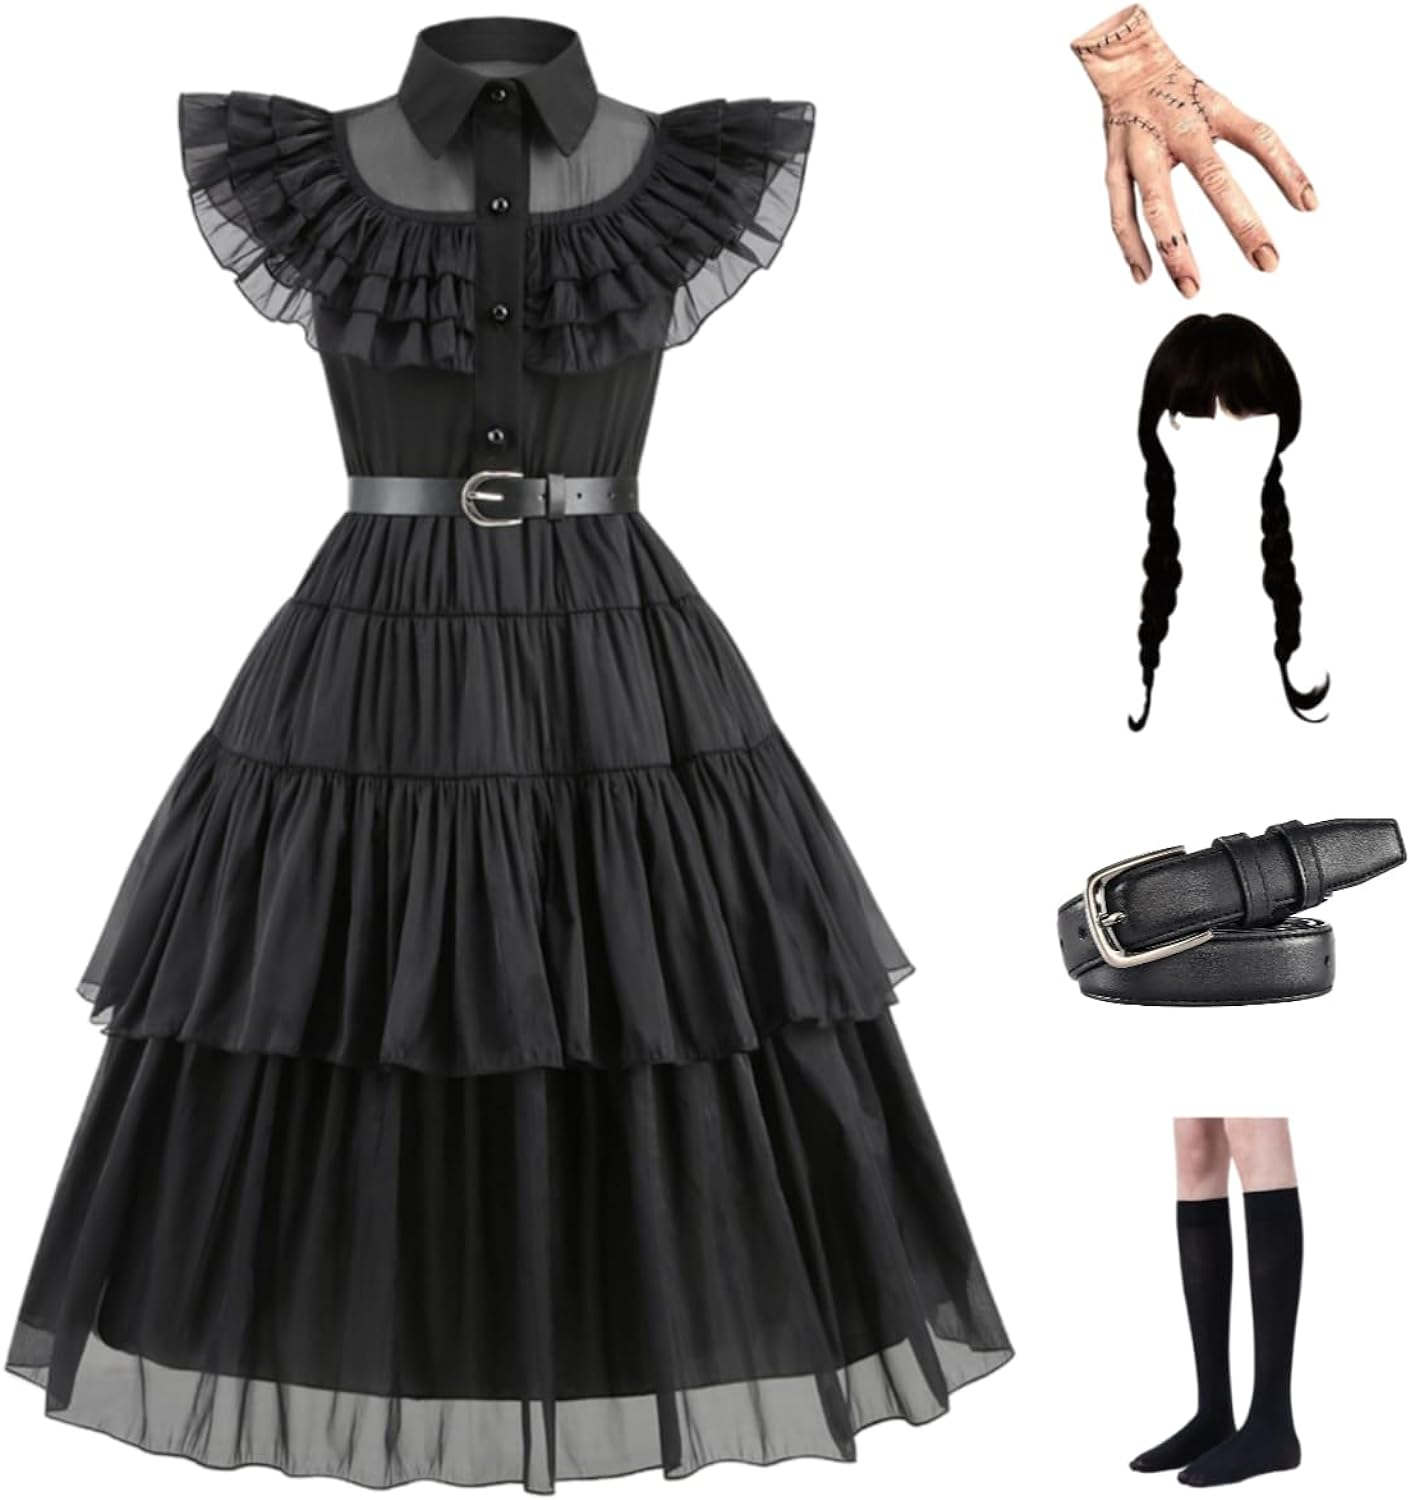 Addams Costume Dress for Girls | Kids Addams Dress with BeltThing Hand Props | Halloween Costume Cosplay Party